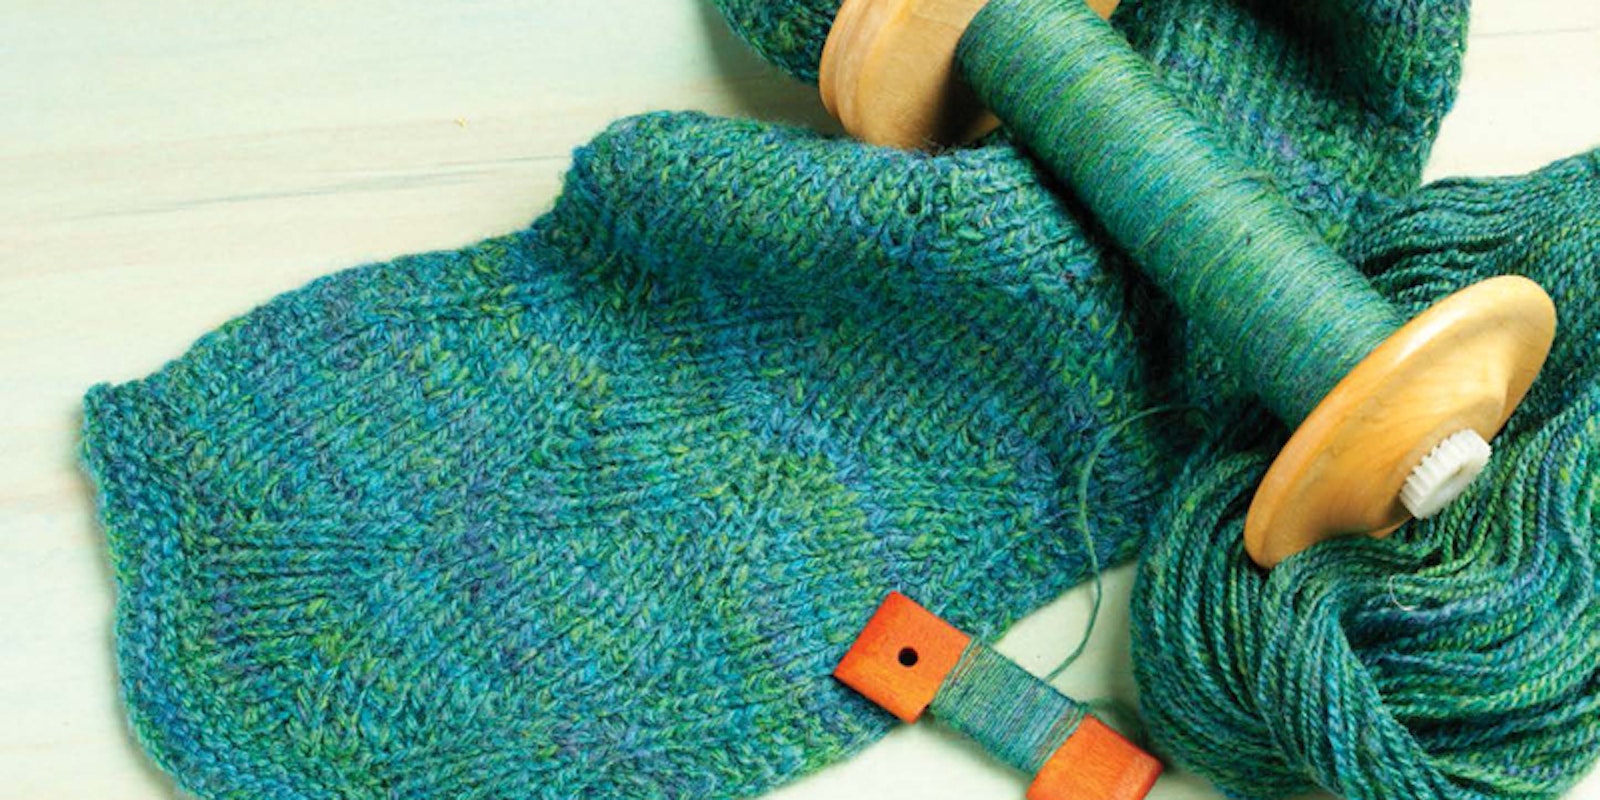 Knitting Patterns to Use Worsted Weight Yarn Leftovers for the